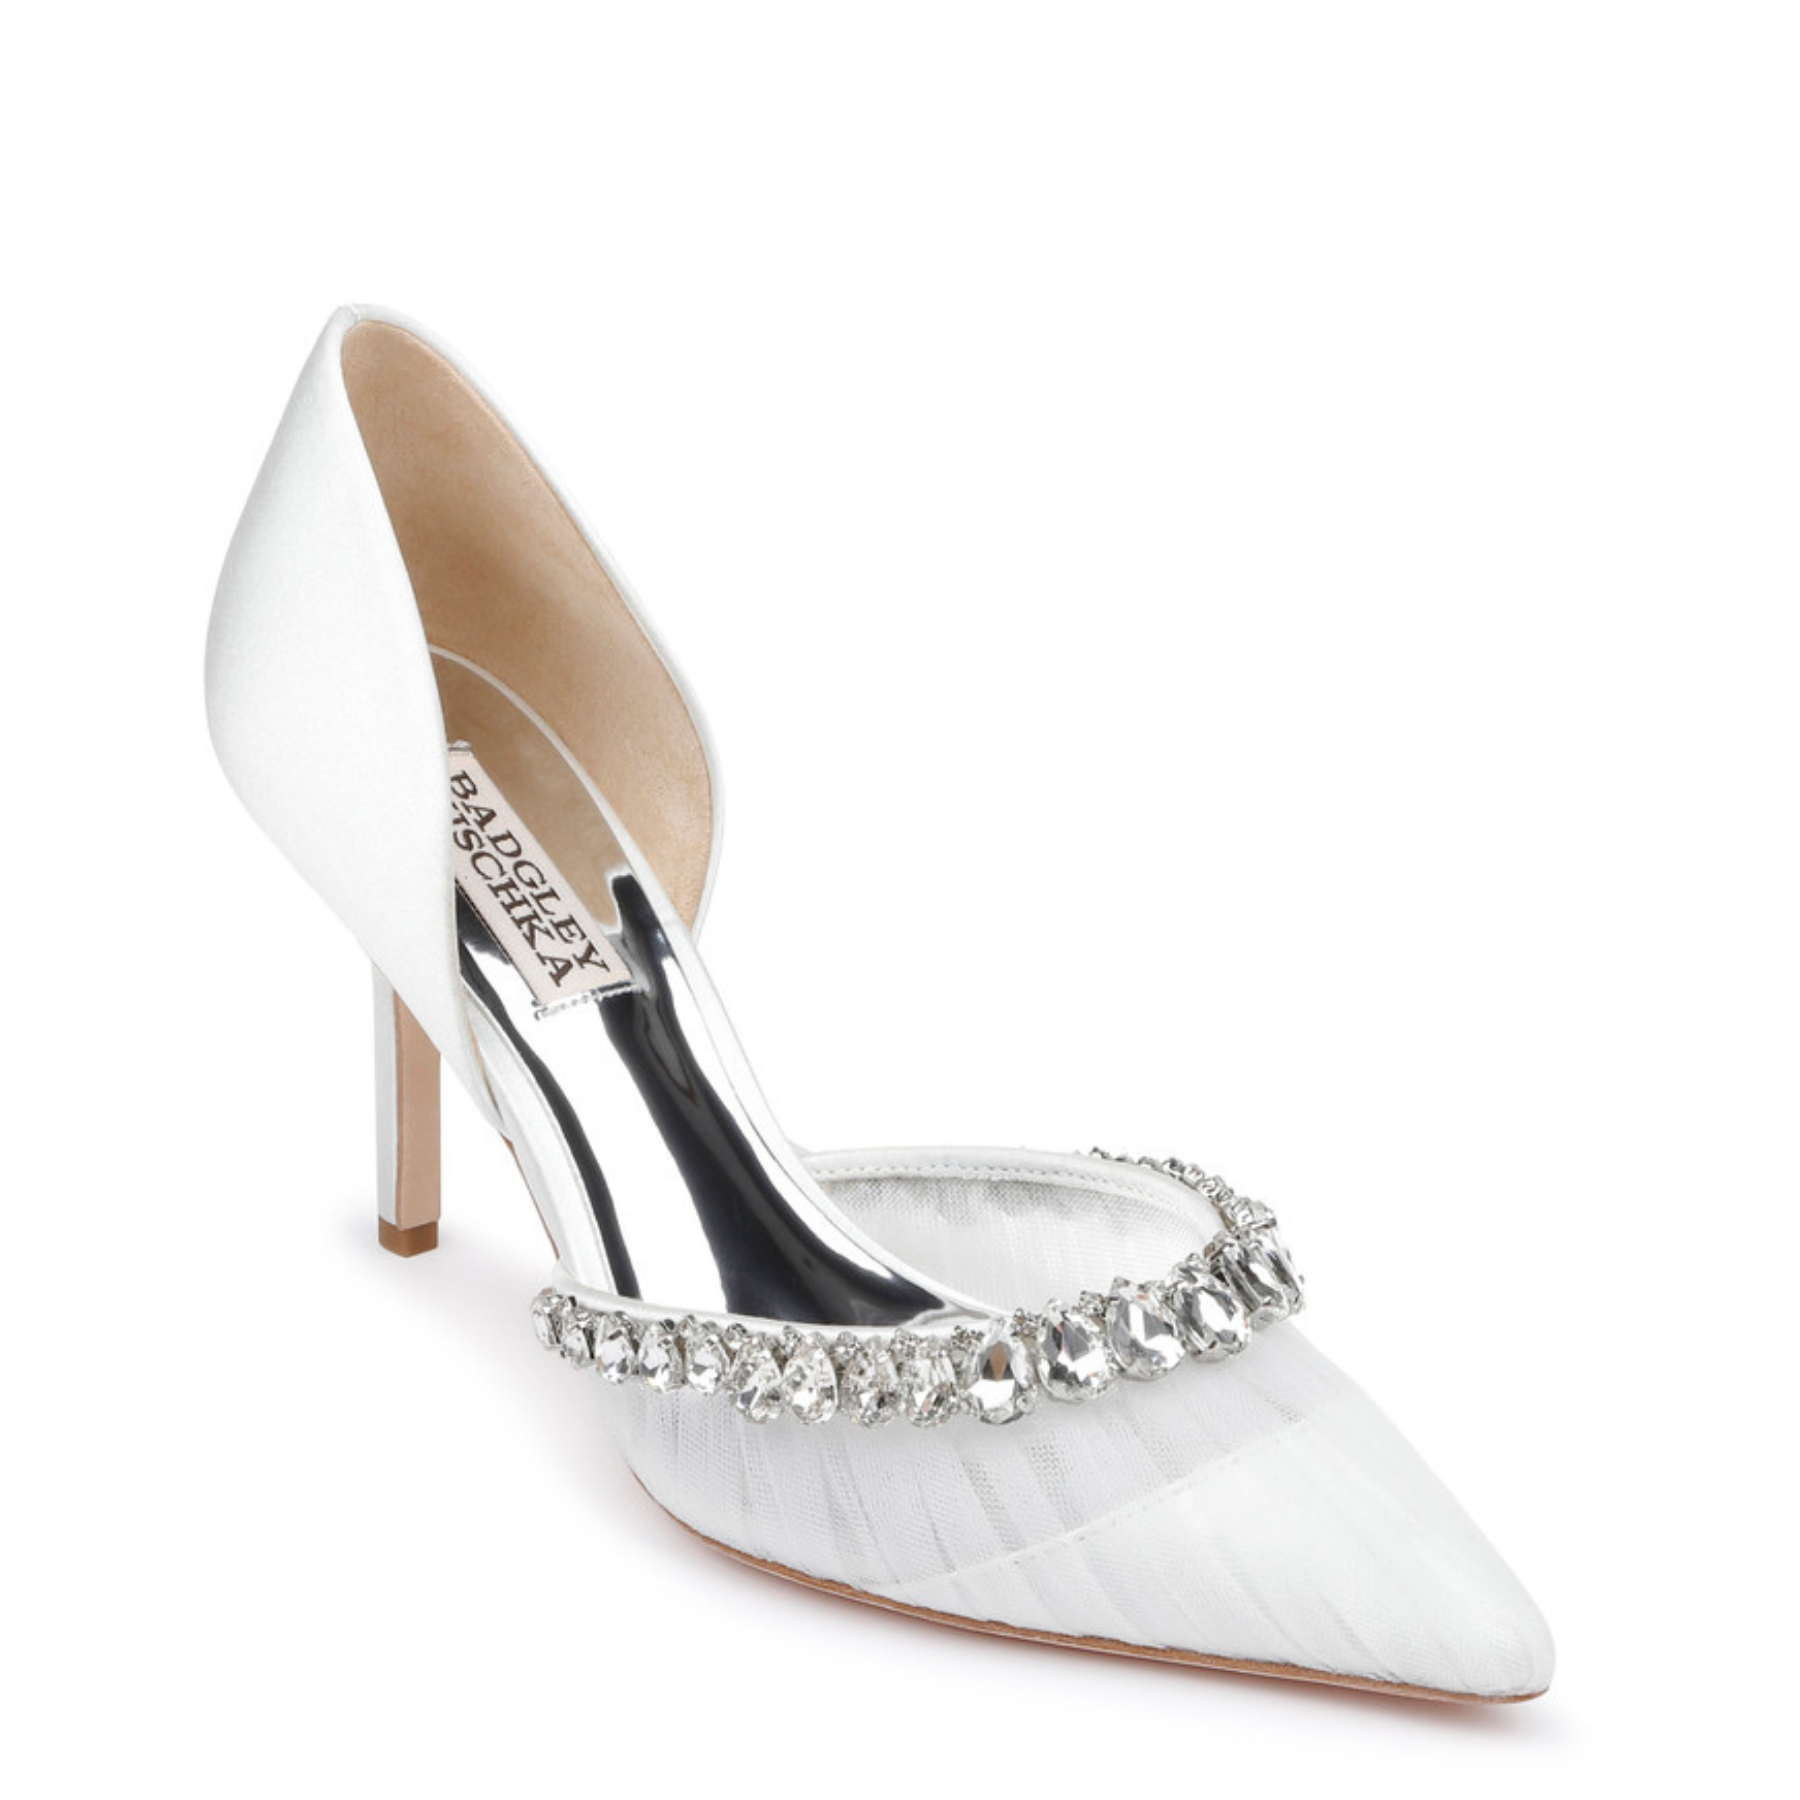 Everley - Satin & Tulle D'orsay Heels with Crystal Embellishments - Soft White